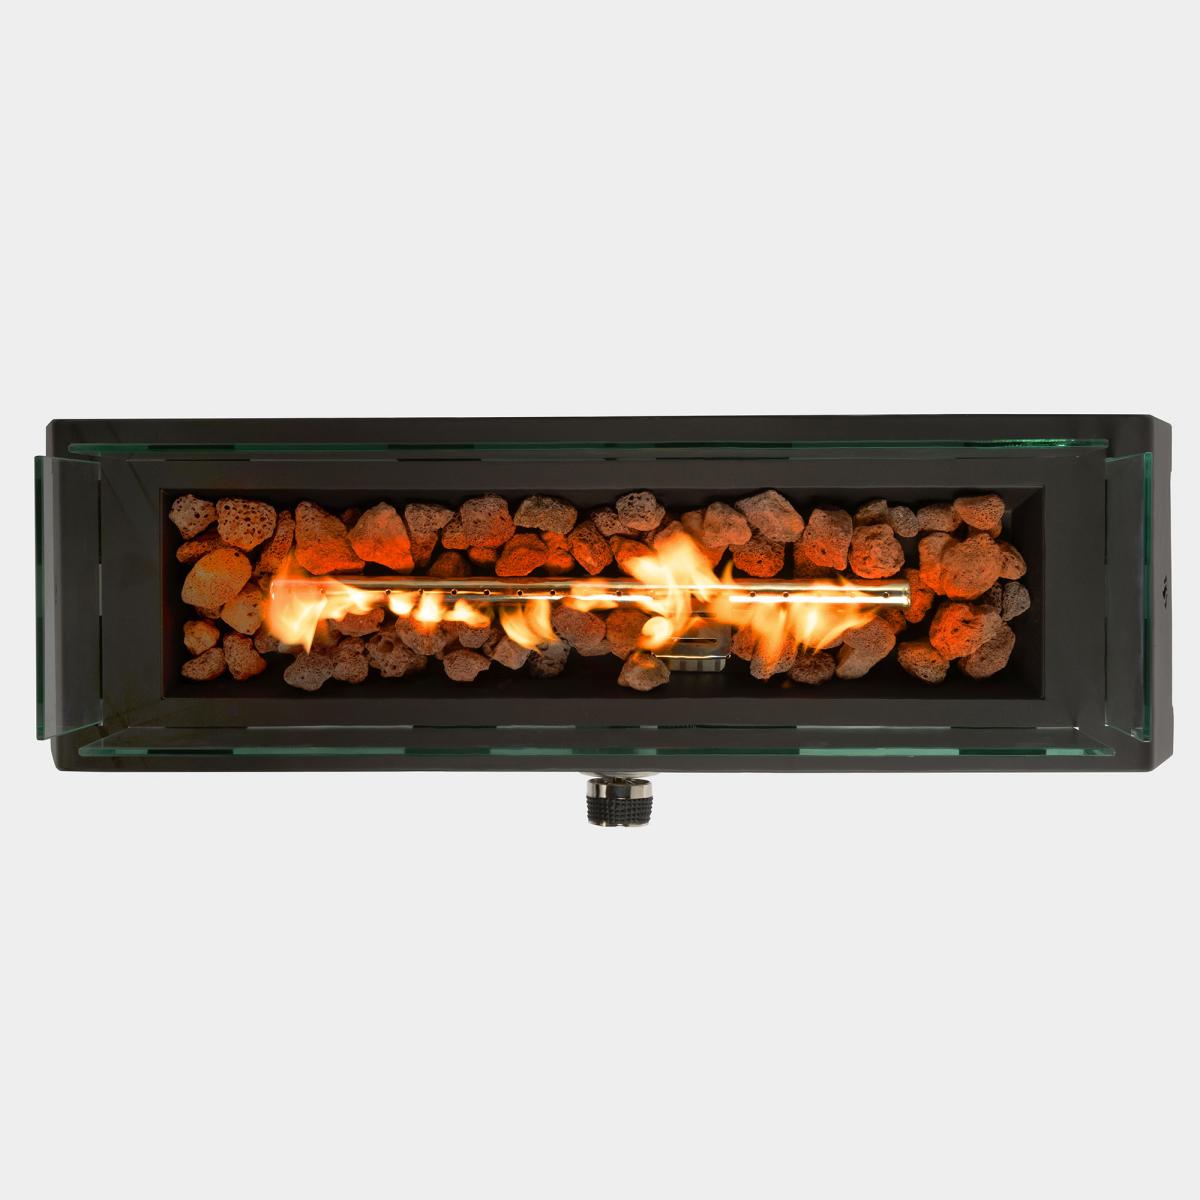 28 inch Tabletop Fire Pit, Propane Gas Fire Pit with Quick Connect Joint, Glass Wind Guard and Lava Rock, Outdoor Portable Tabletop Fire Pit